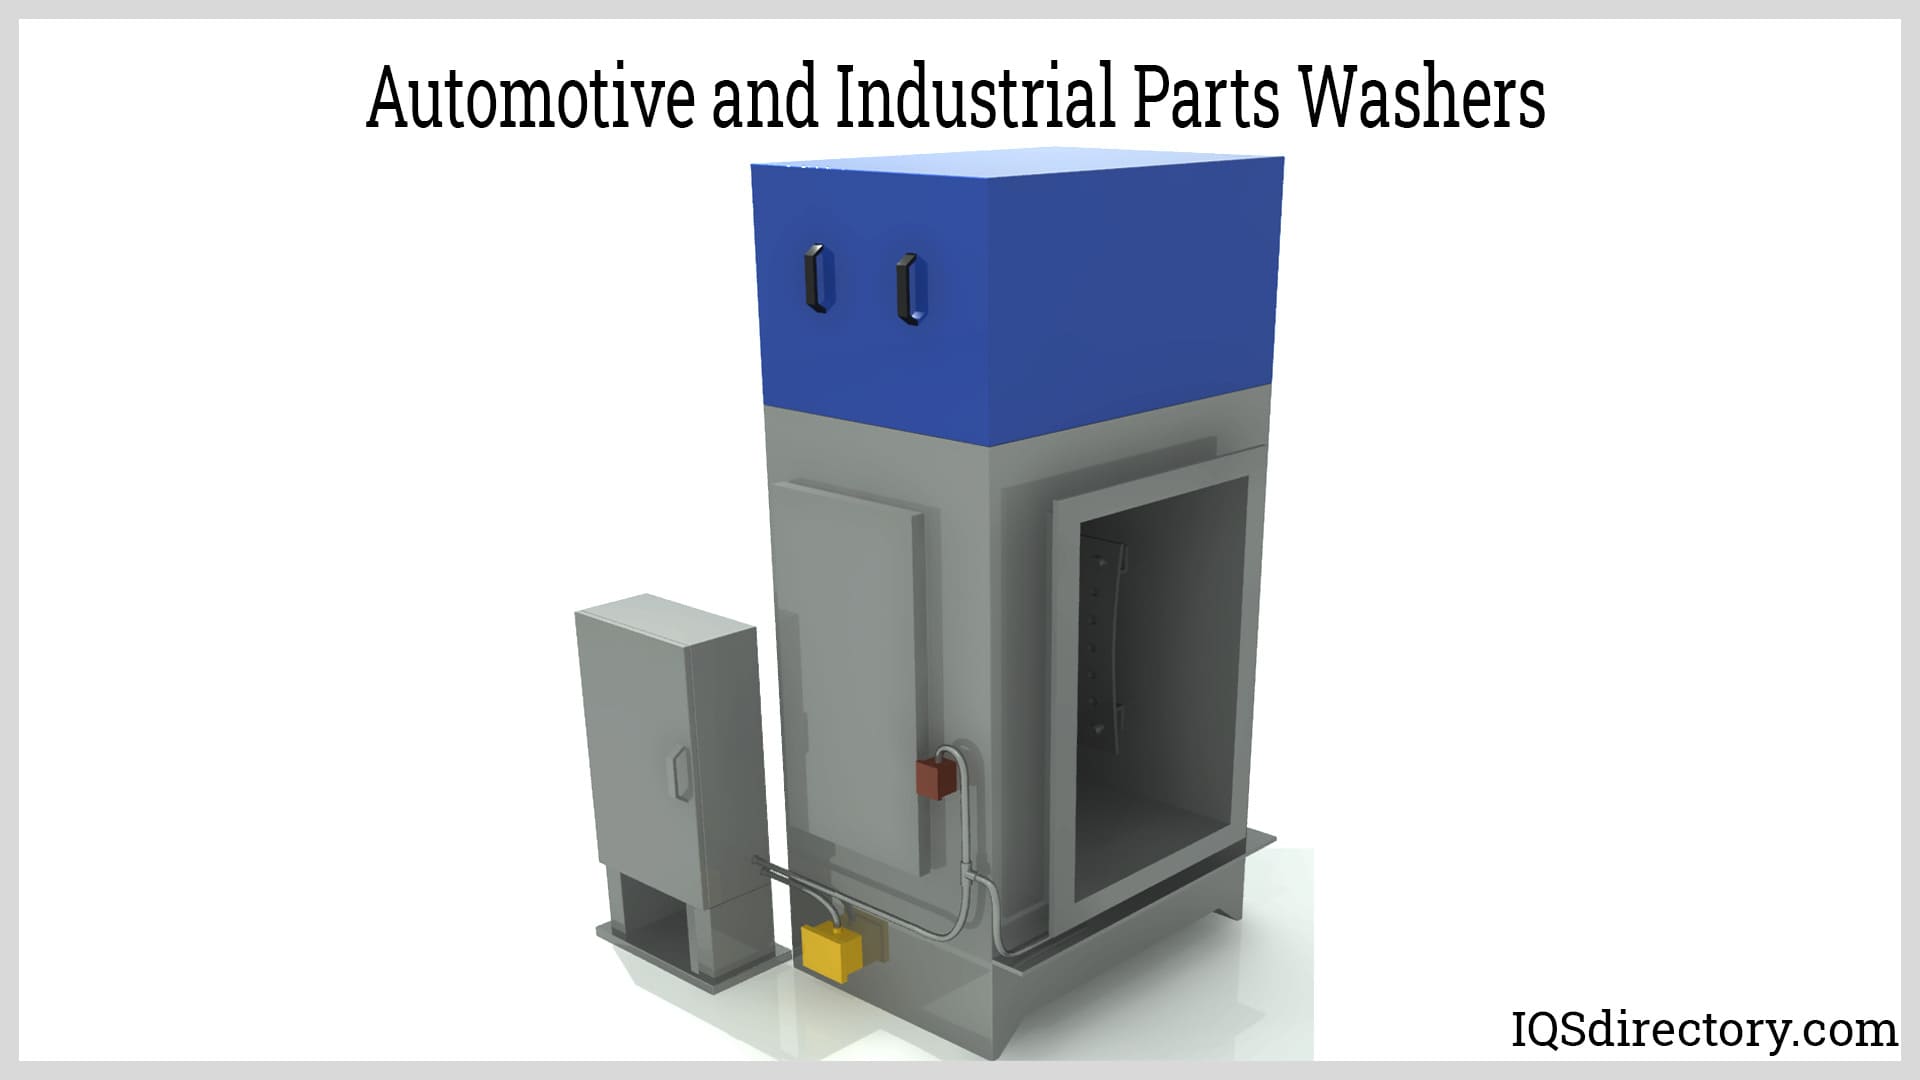 Automotive and Industrial Parts Washers